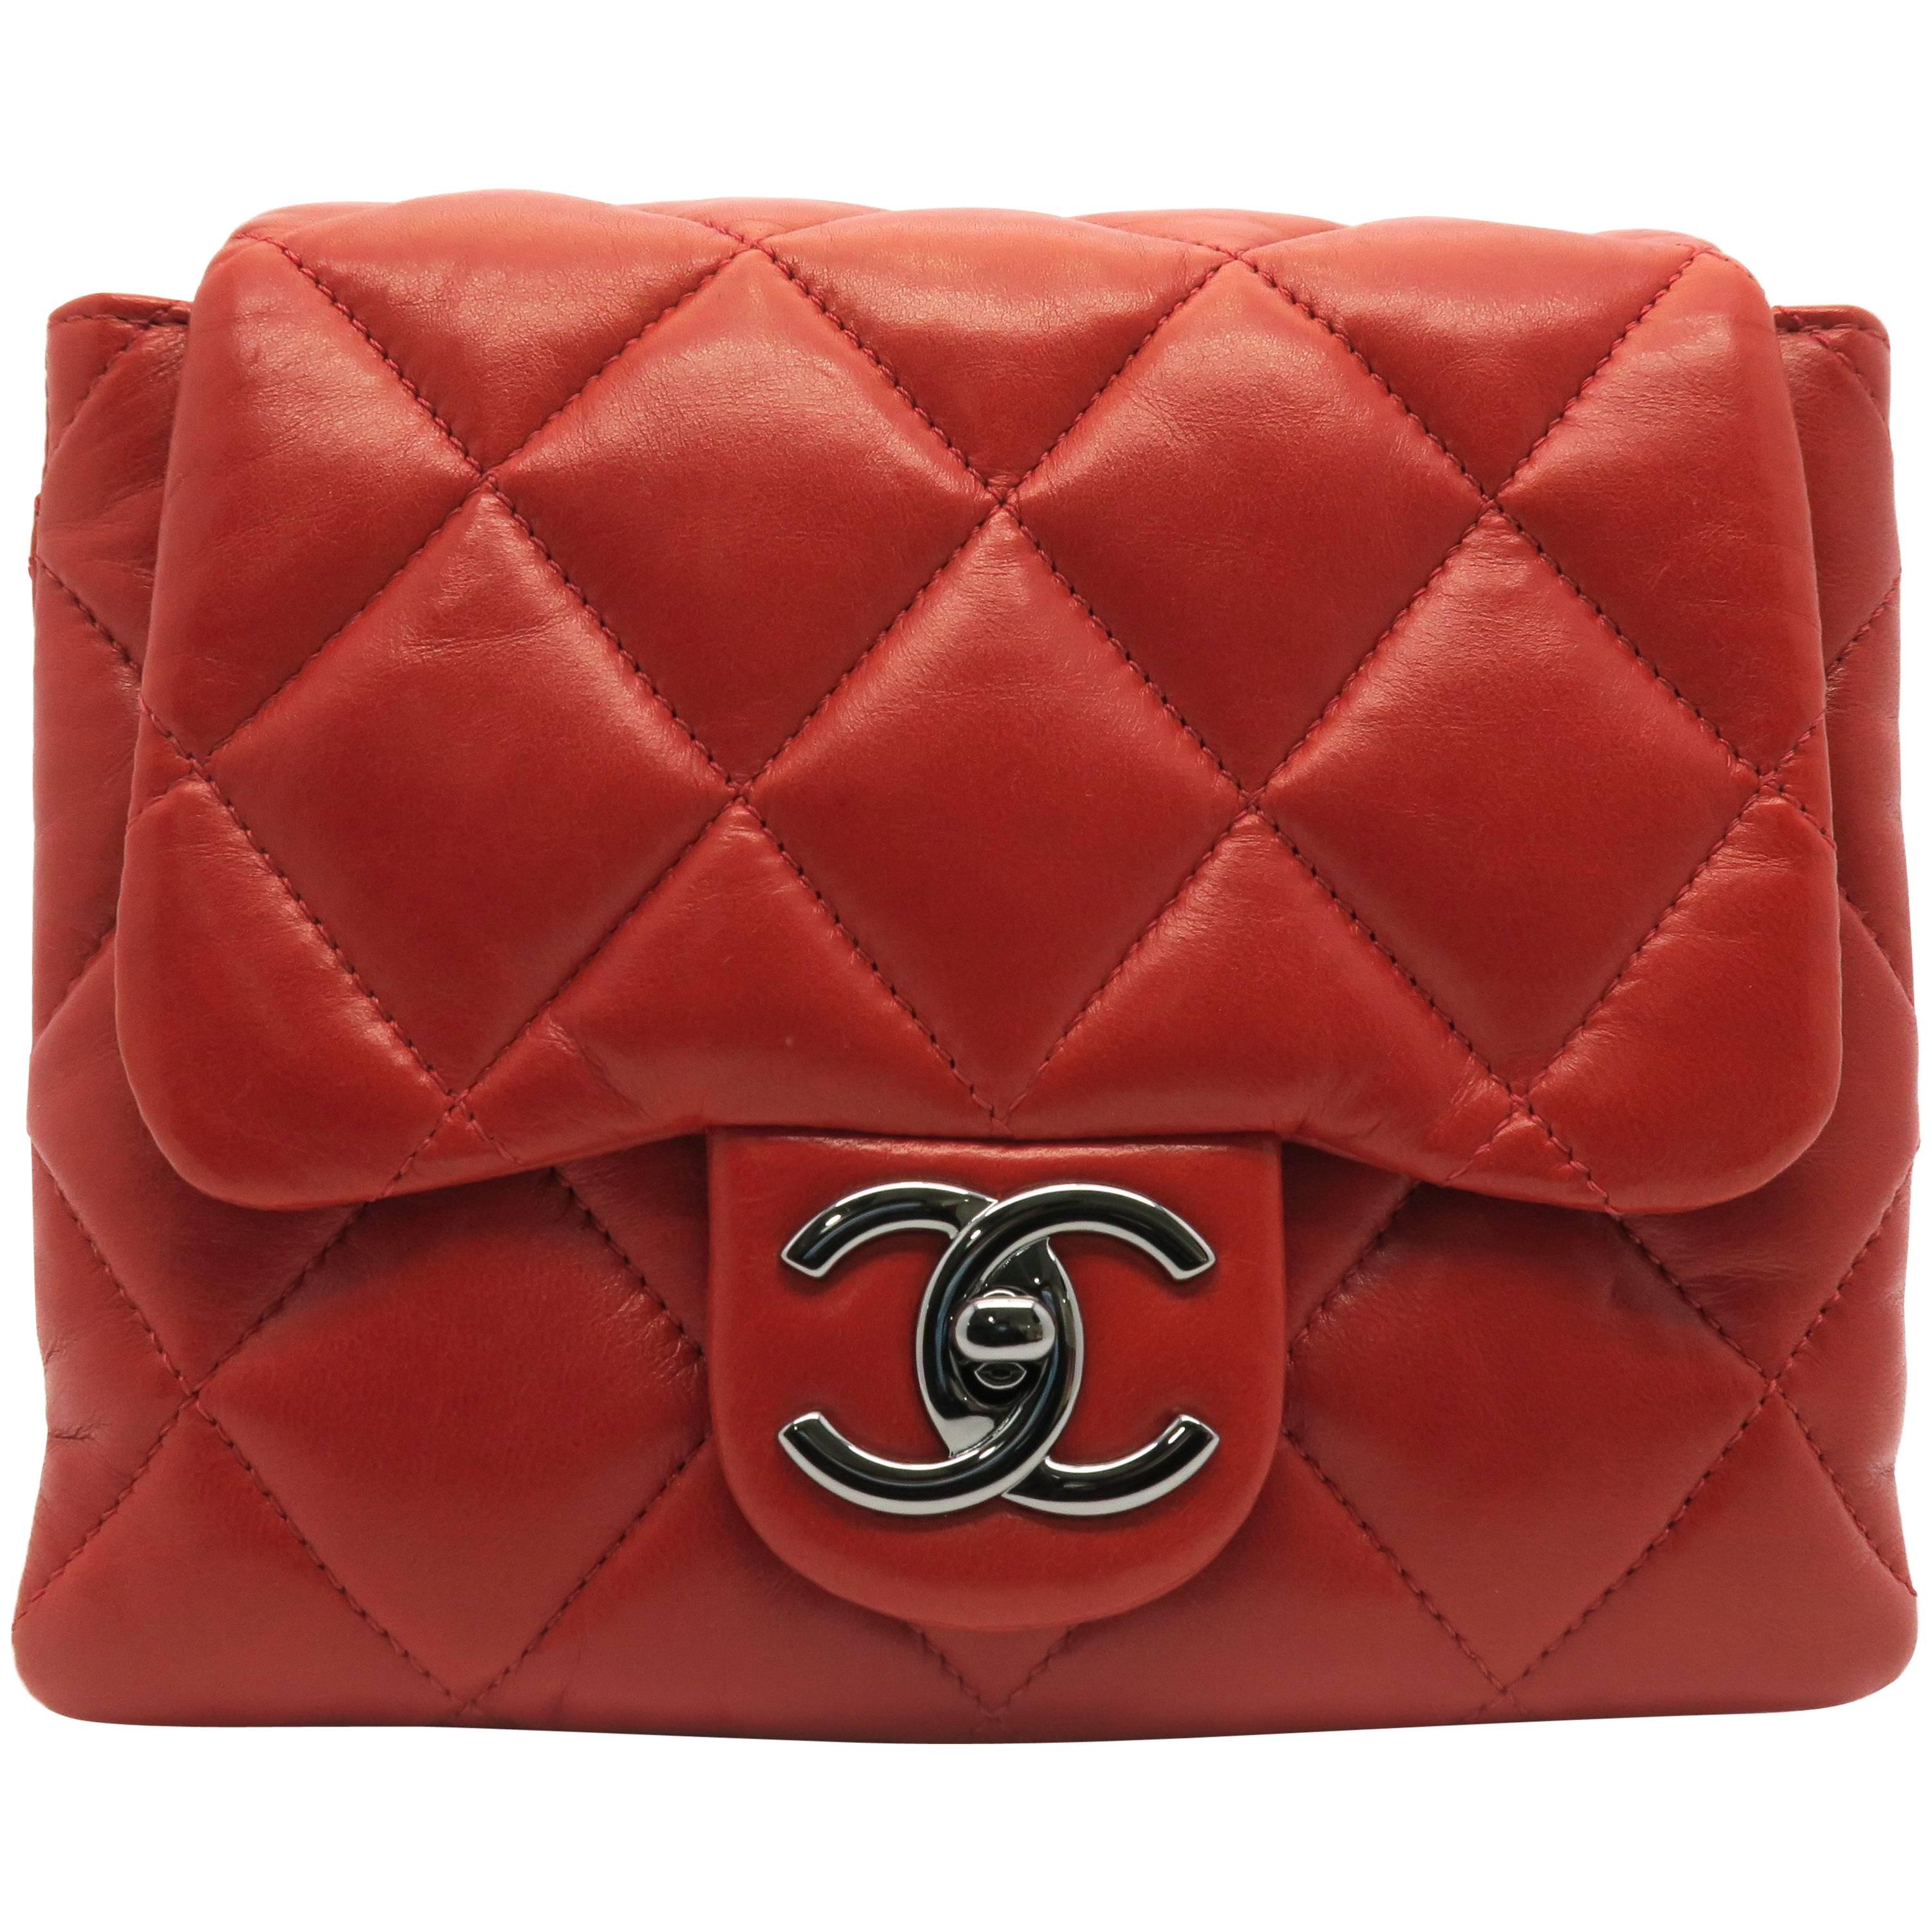 Chanel Red Quilted Calfskin Leather SHW Chain Shoulder Bag